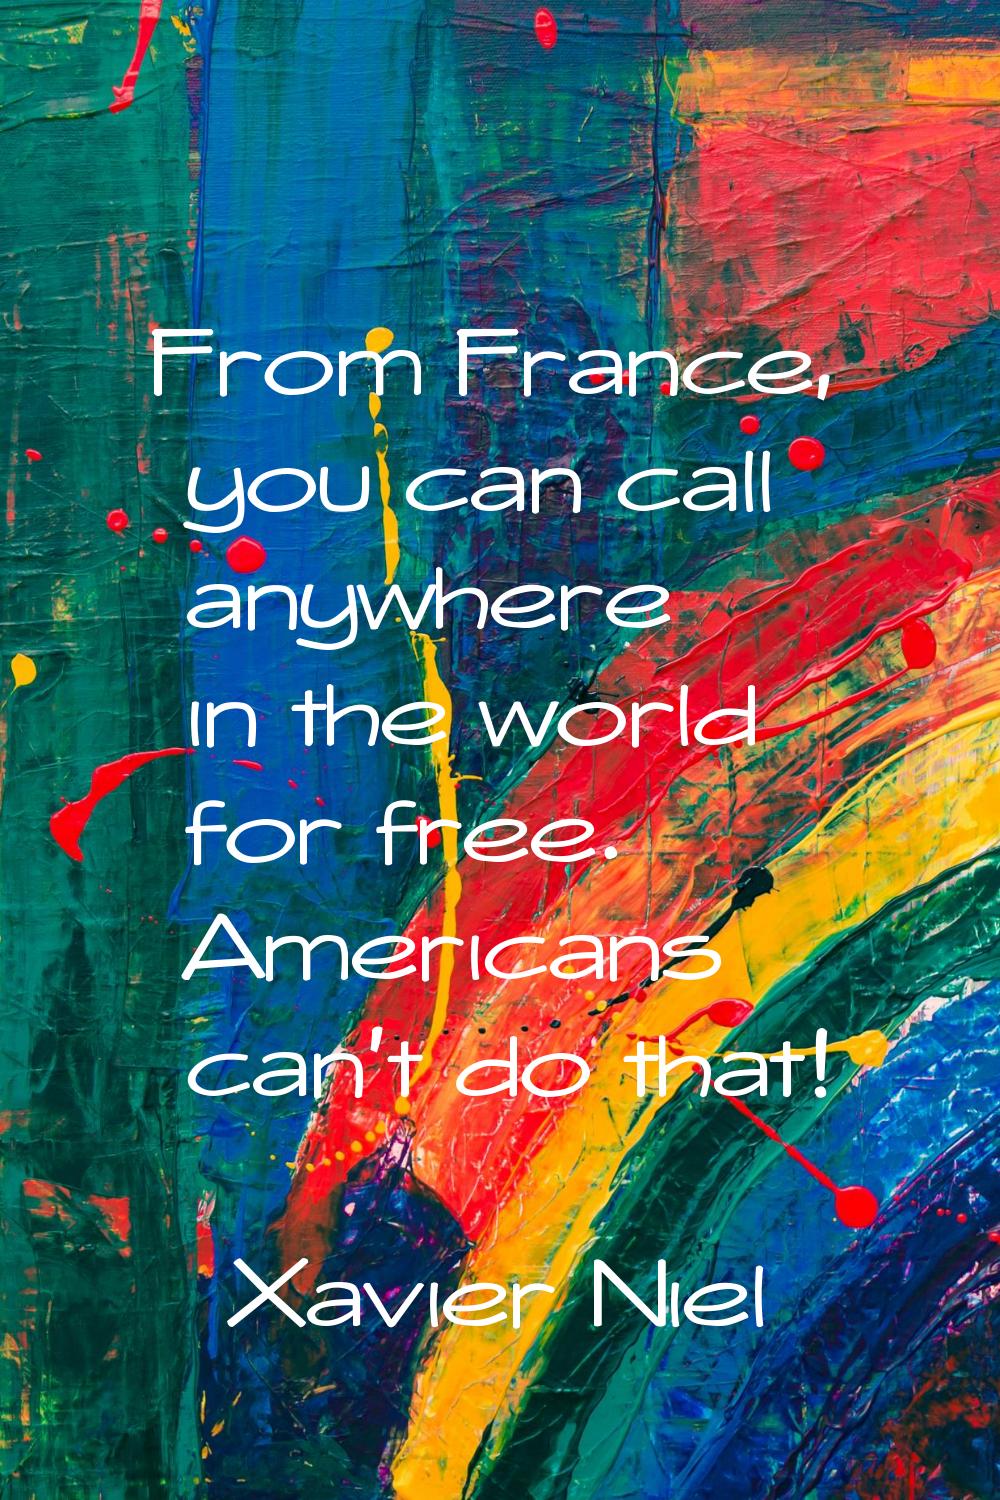 From France, you can call anywhere in the world for free. Americans can't do that!